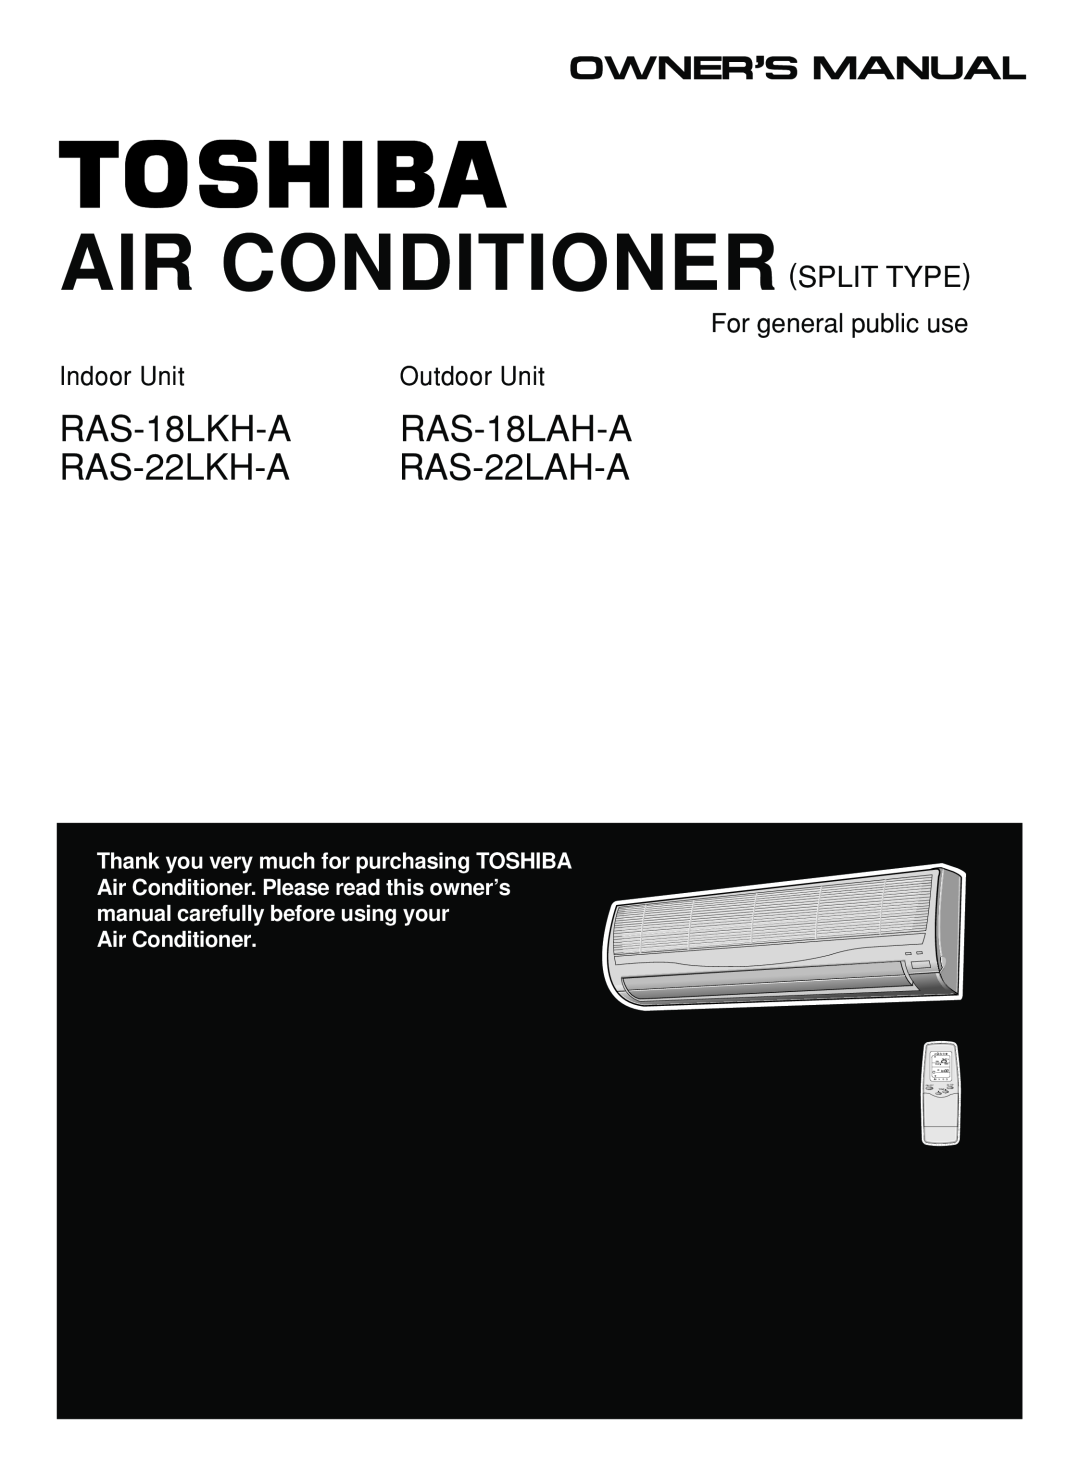 Toshiba owner manual Air Conditioner Split Type, RAS-18LKH-A RAS-18LAH-A RAS-22LKH-A RAS-22LAH-A, Indoor Unit 